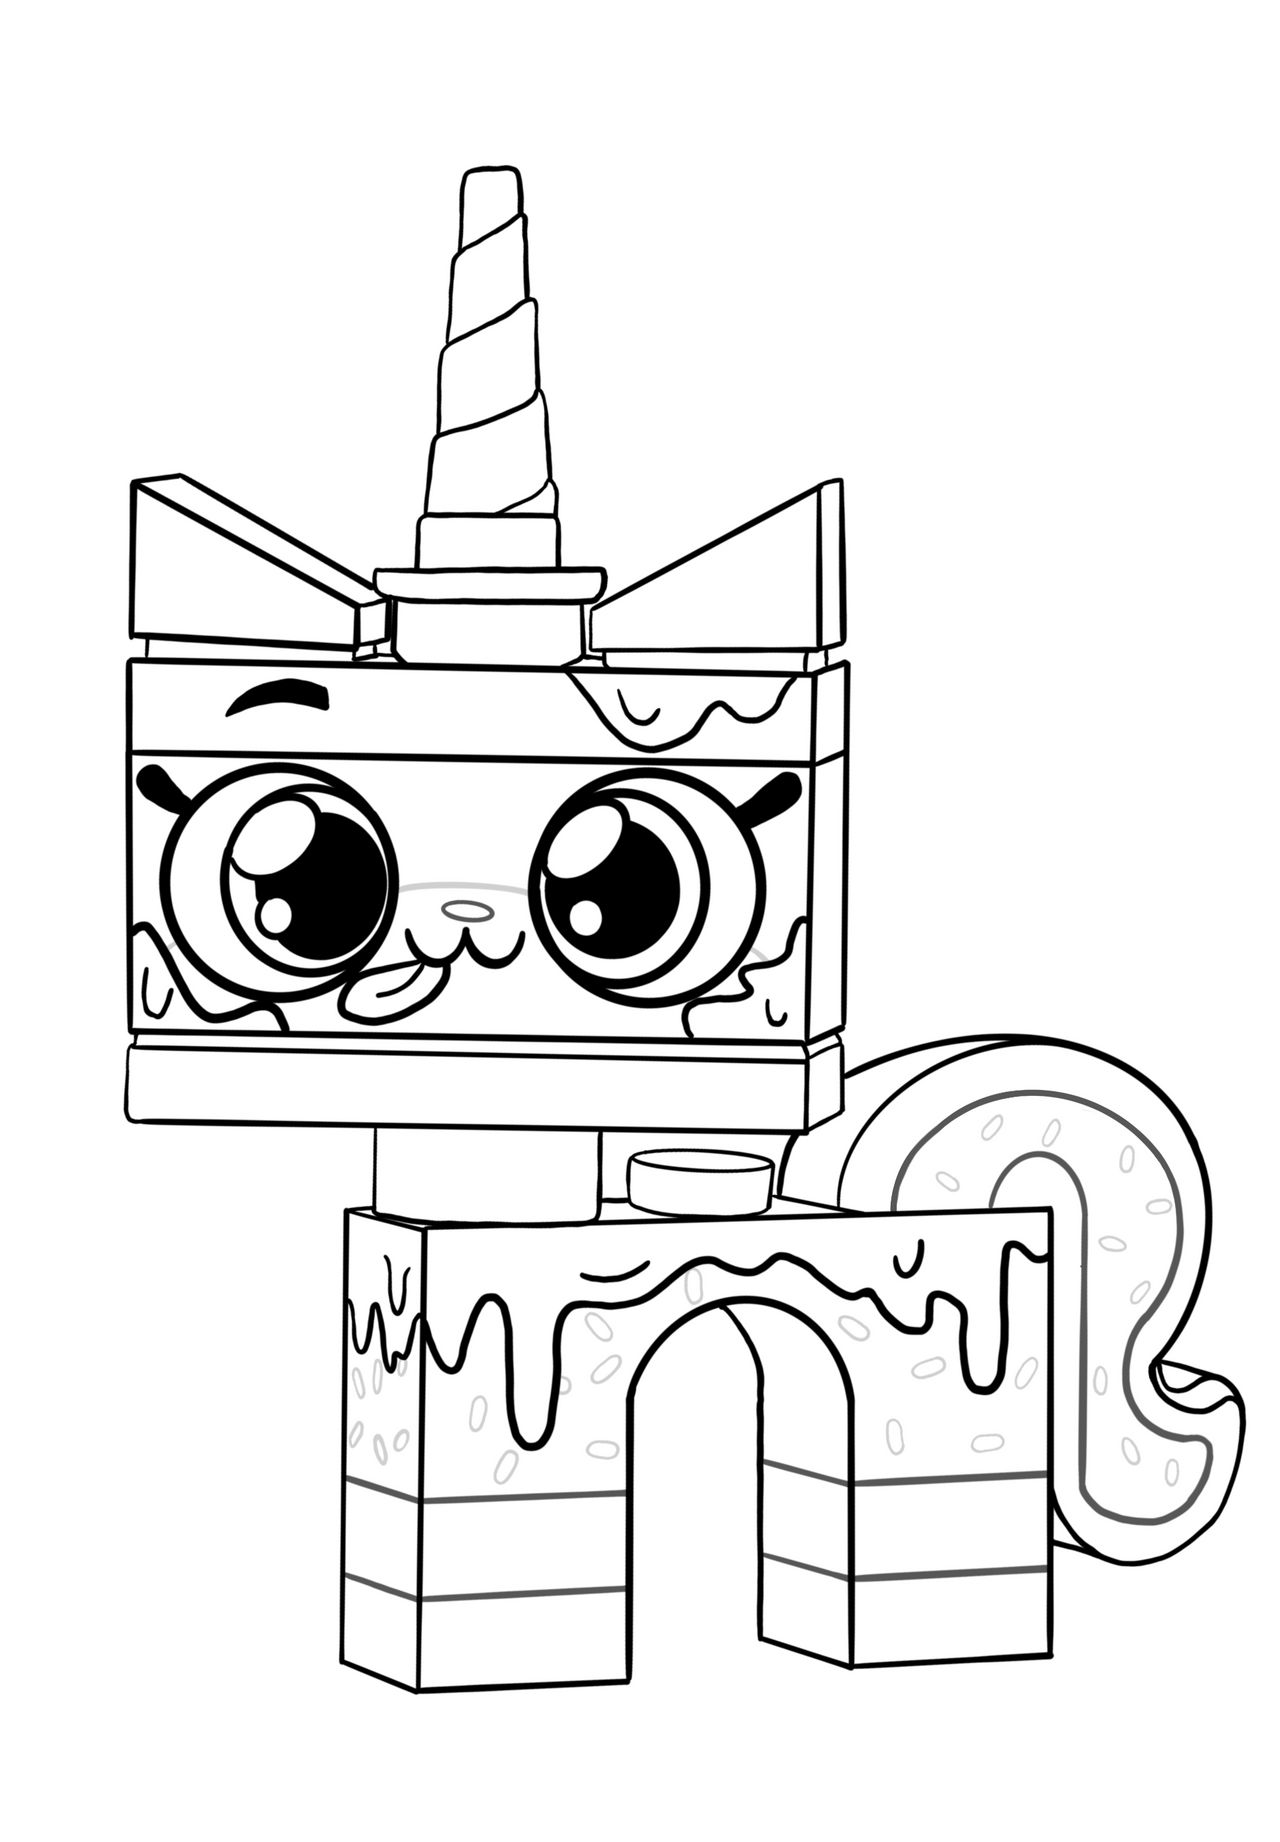 Unikitty Sprinkle Cake Kitty Coloring Page by goomba478 on DeviantArt